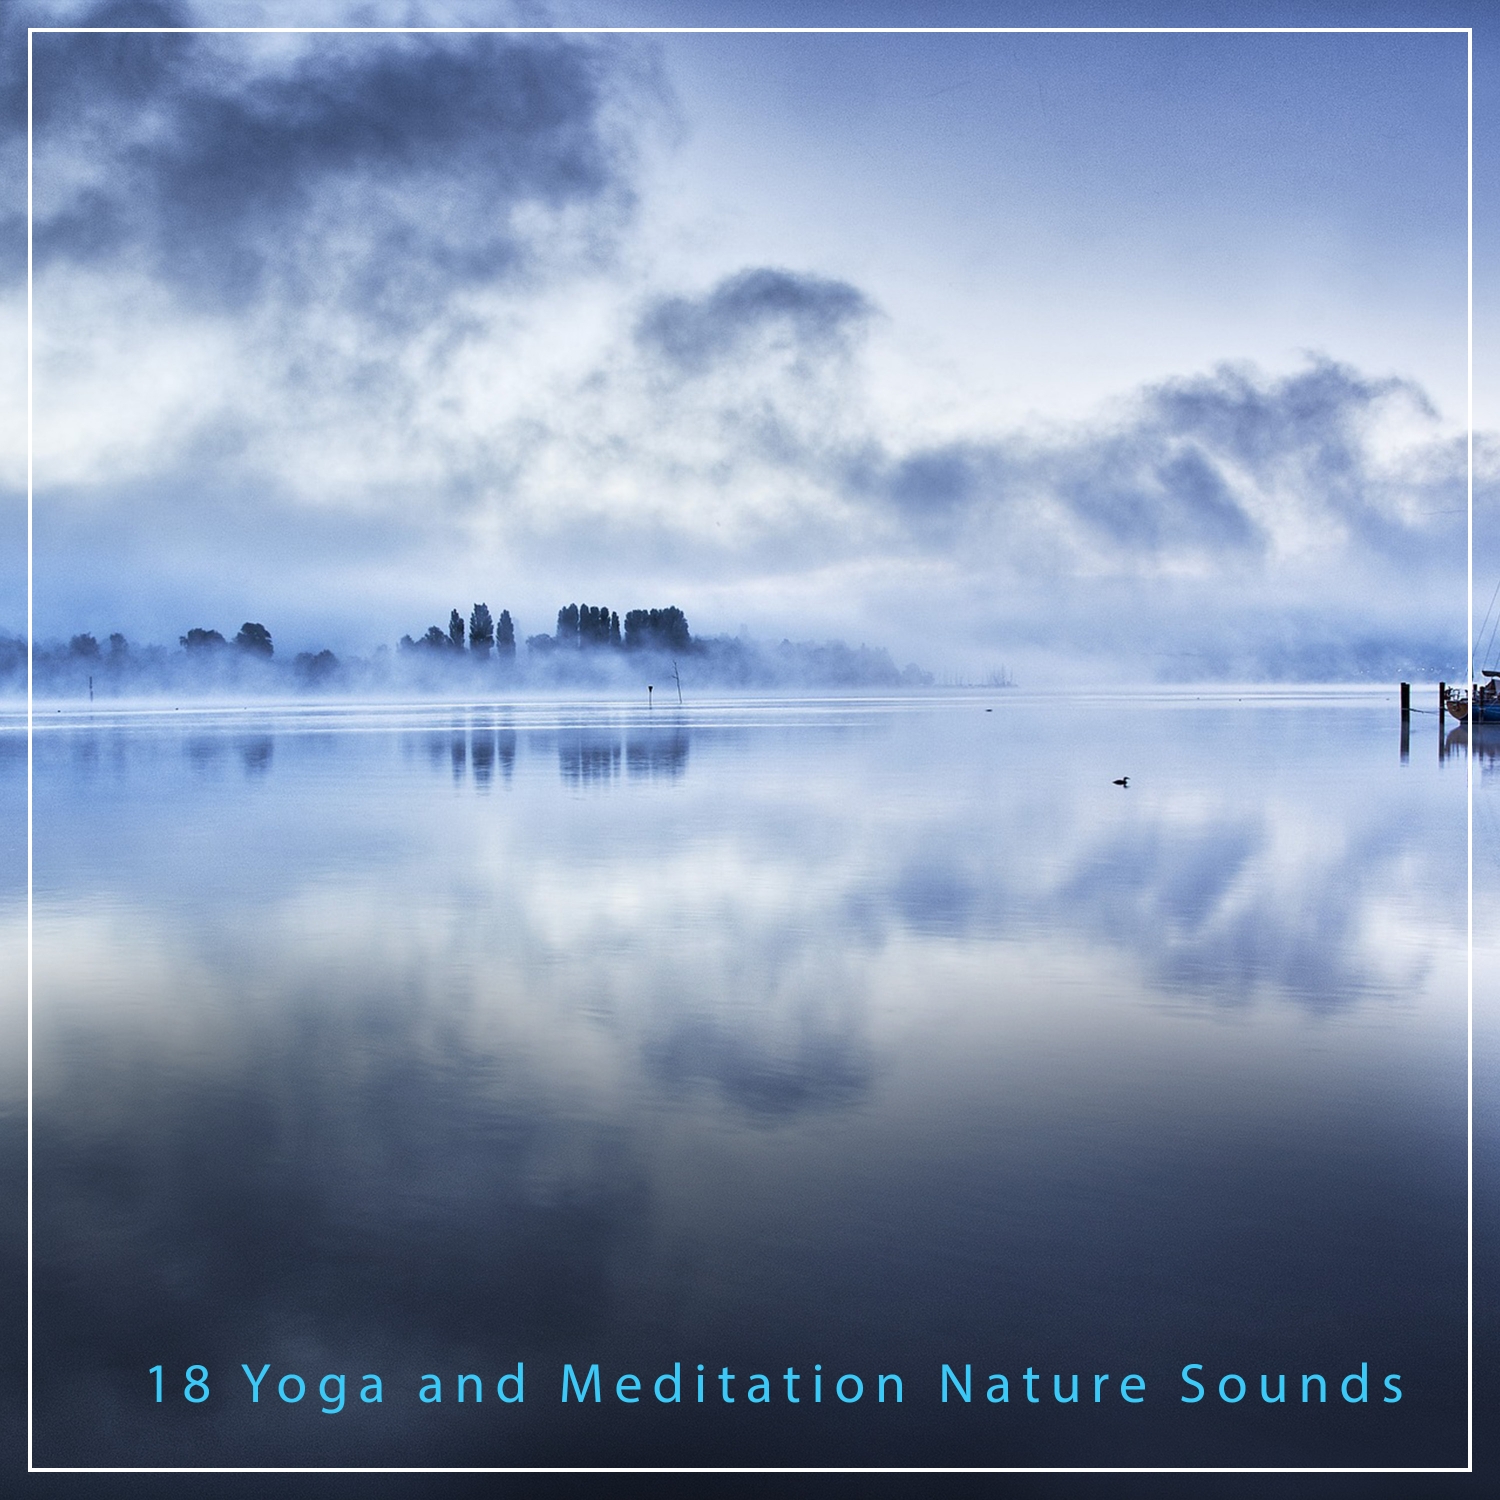 18 Yoga and Meditation Nature Sounds - Peaceful and Ambient